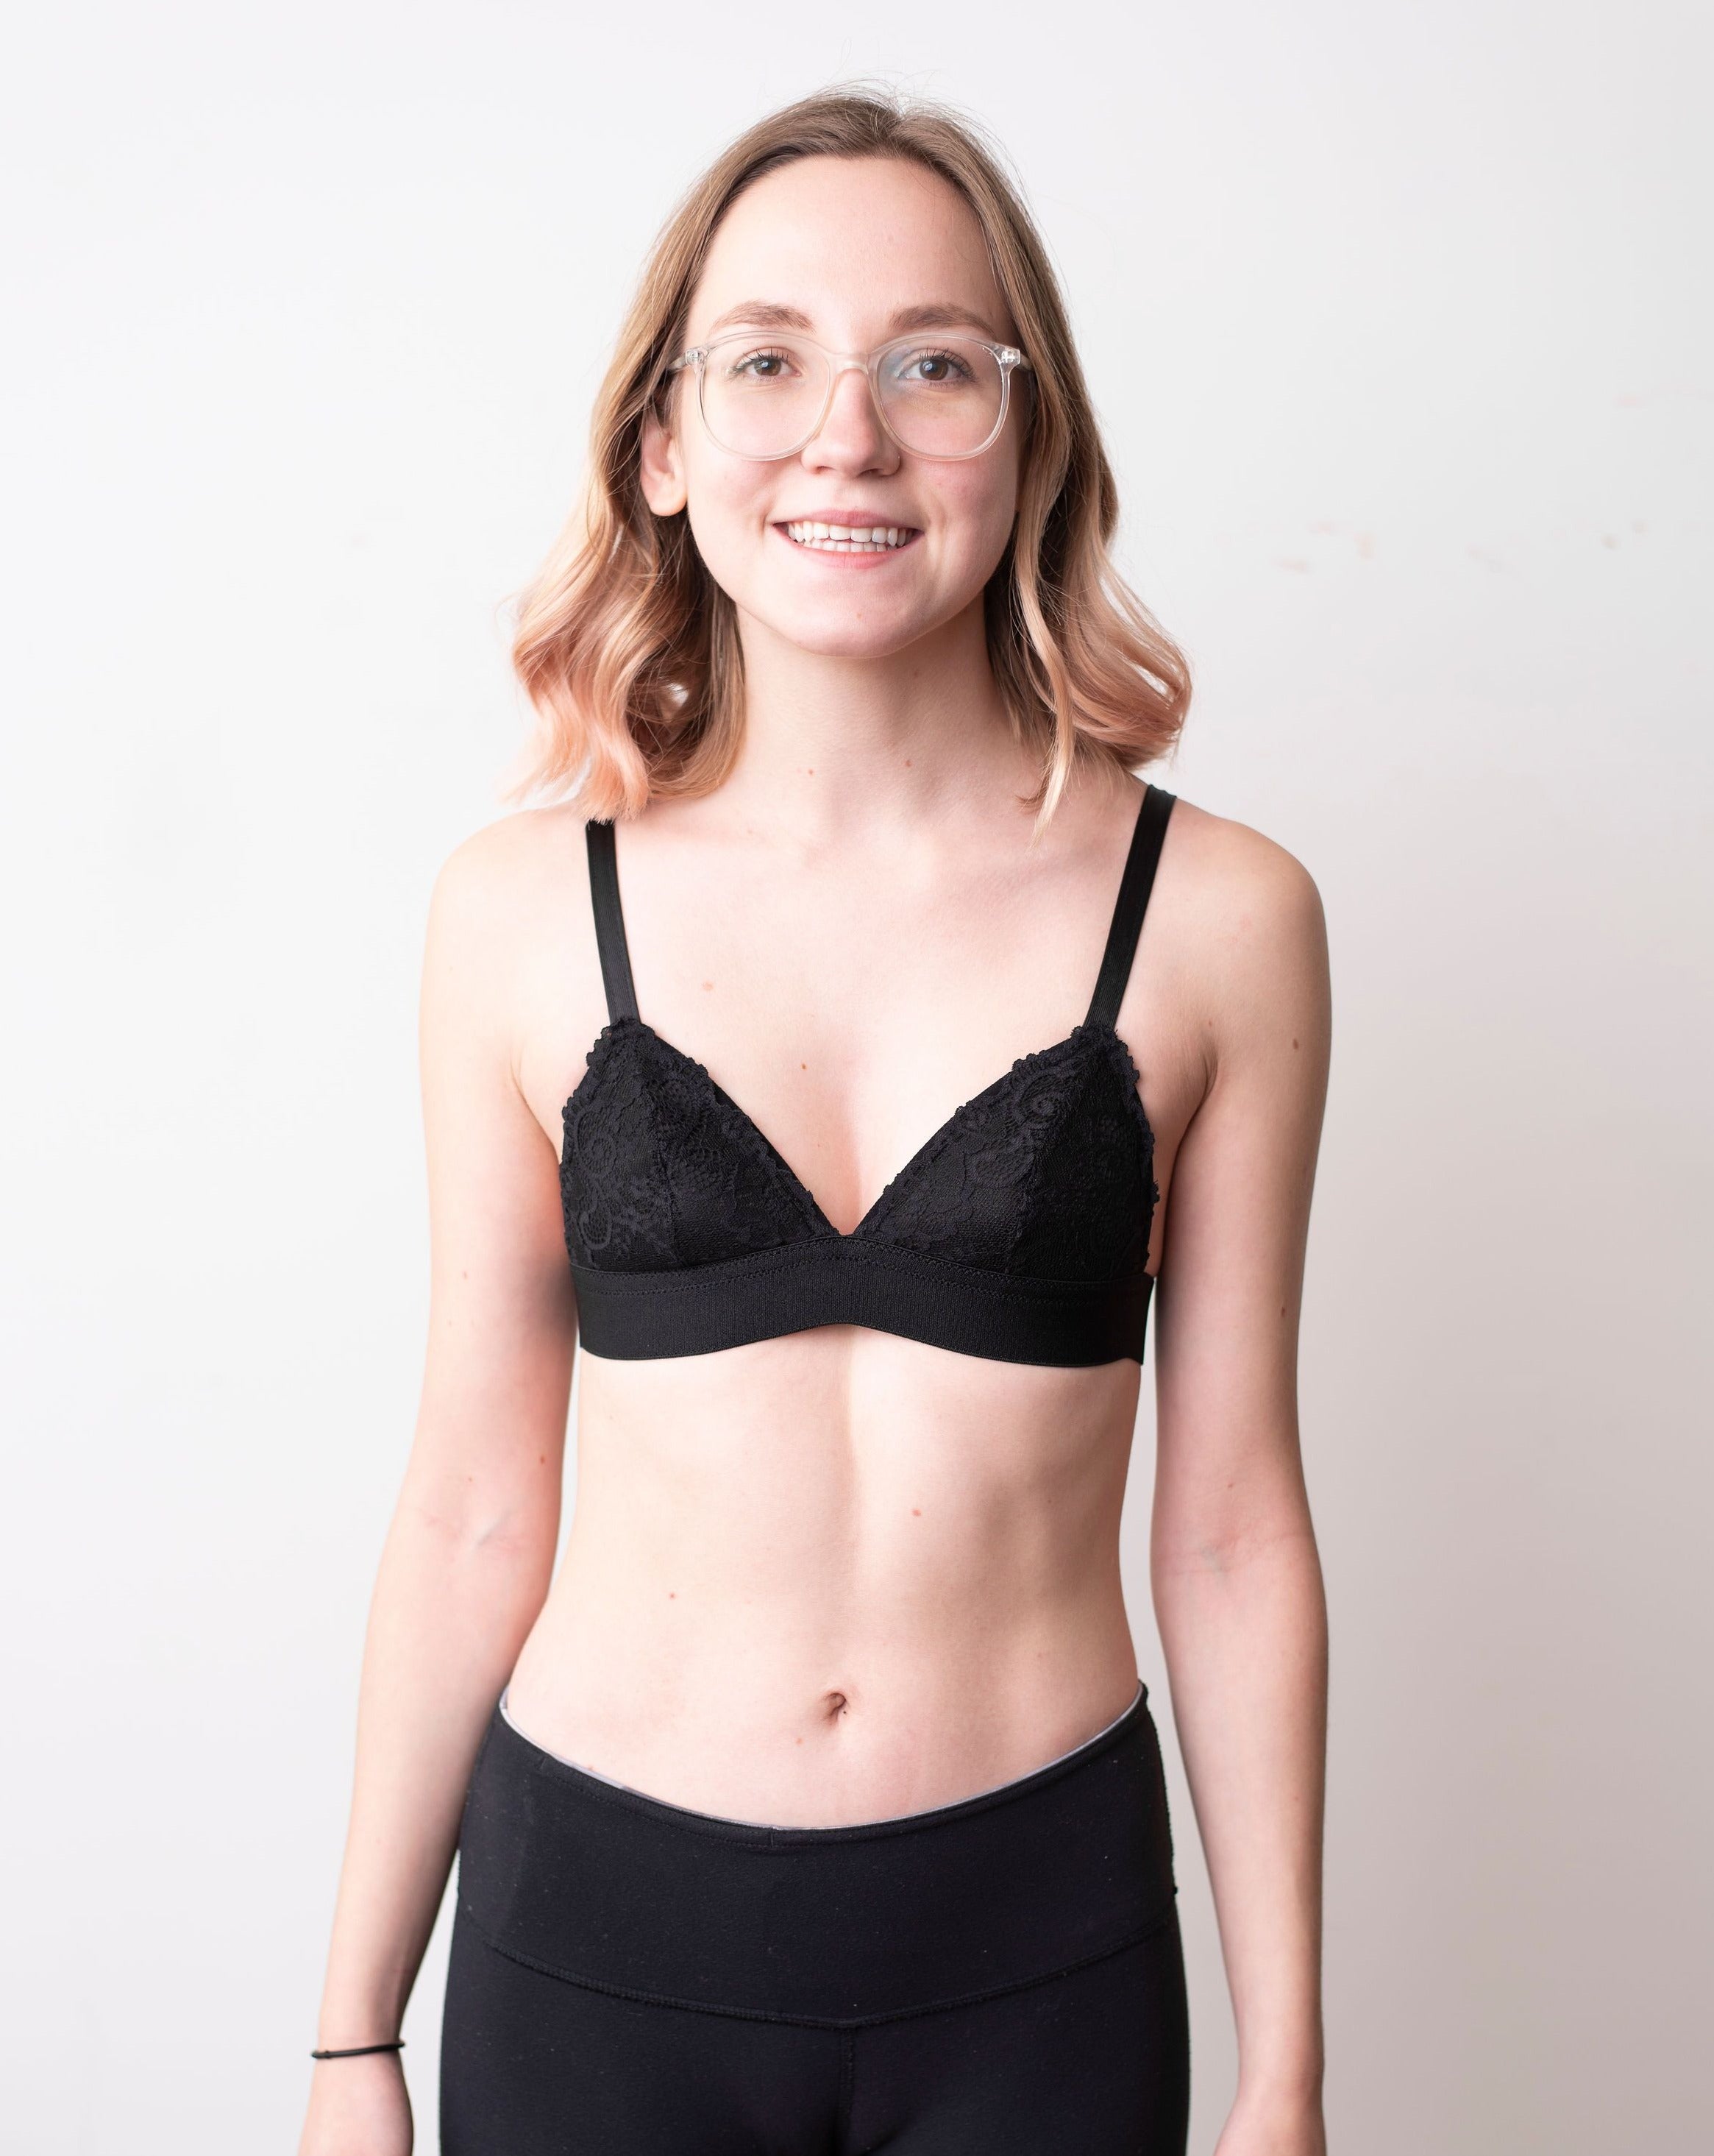 Haley from Rubies Bras, a female with medium blond hair wearing a black scalloped lace wirefree bra from our petites collection. Full front body shot on white back drop.